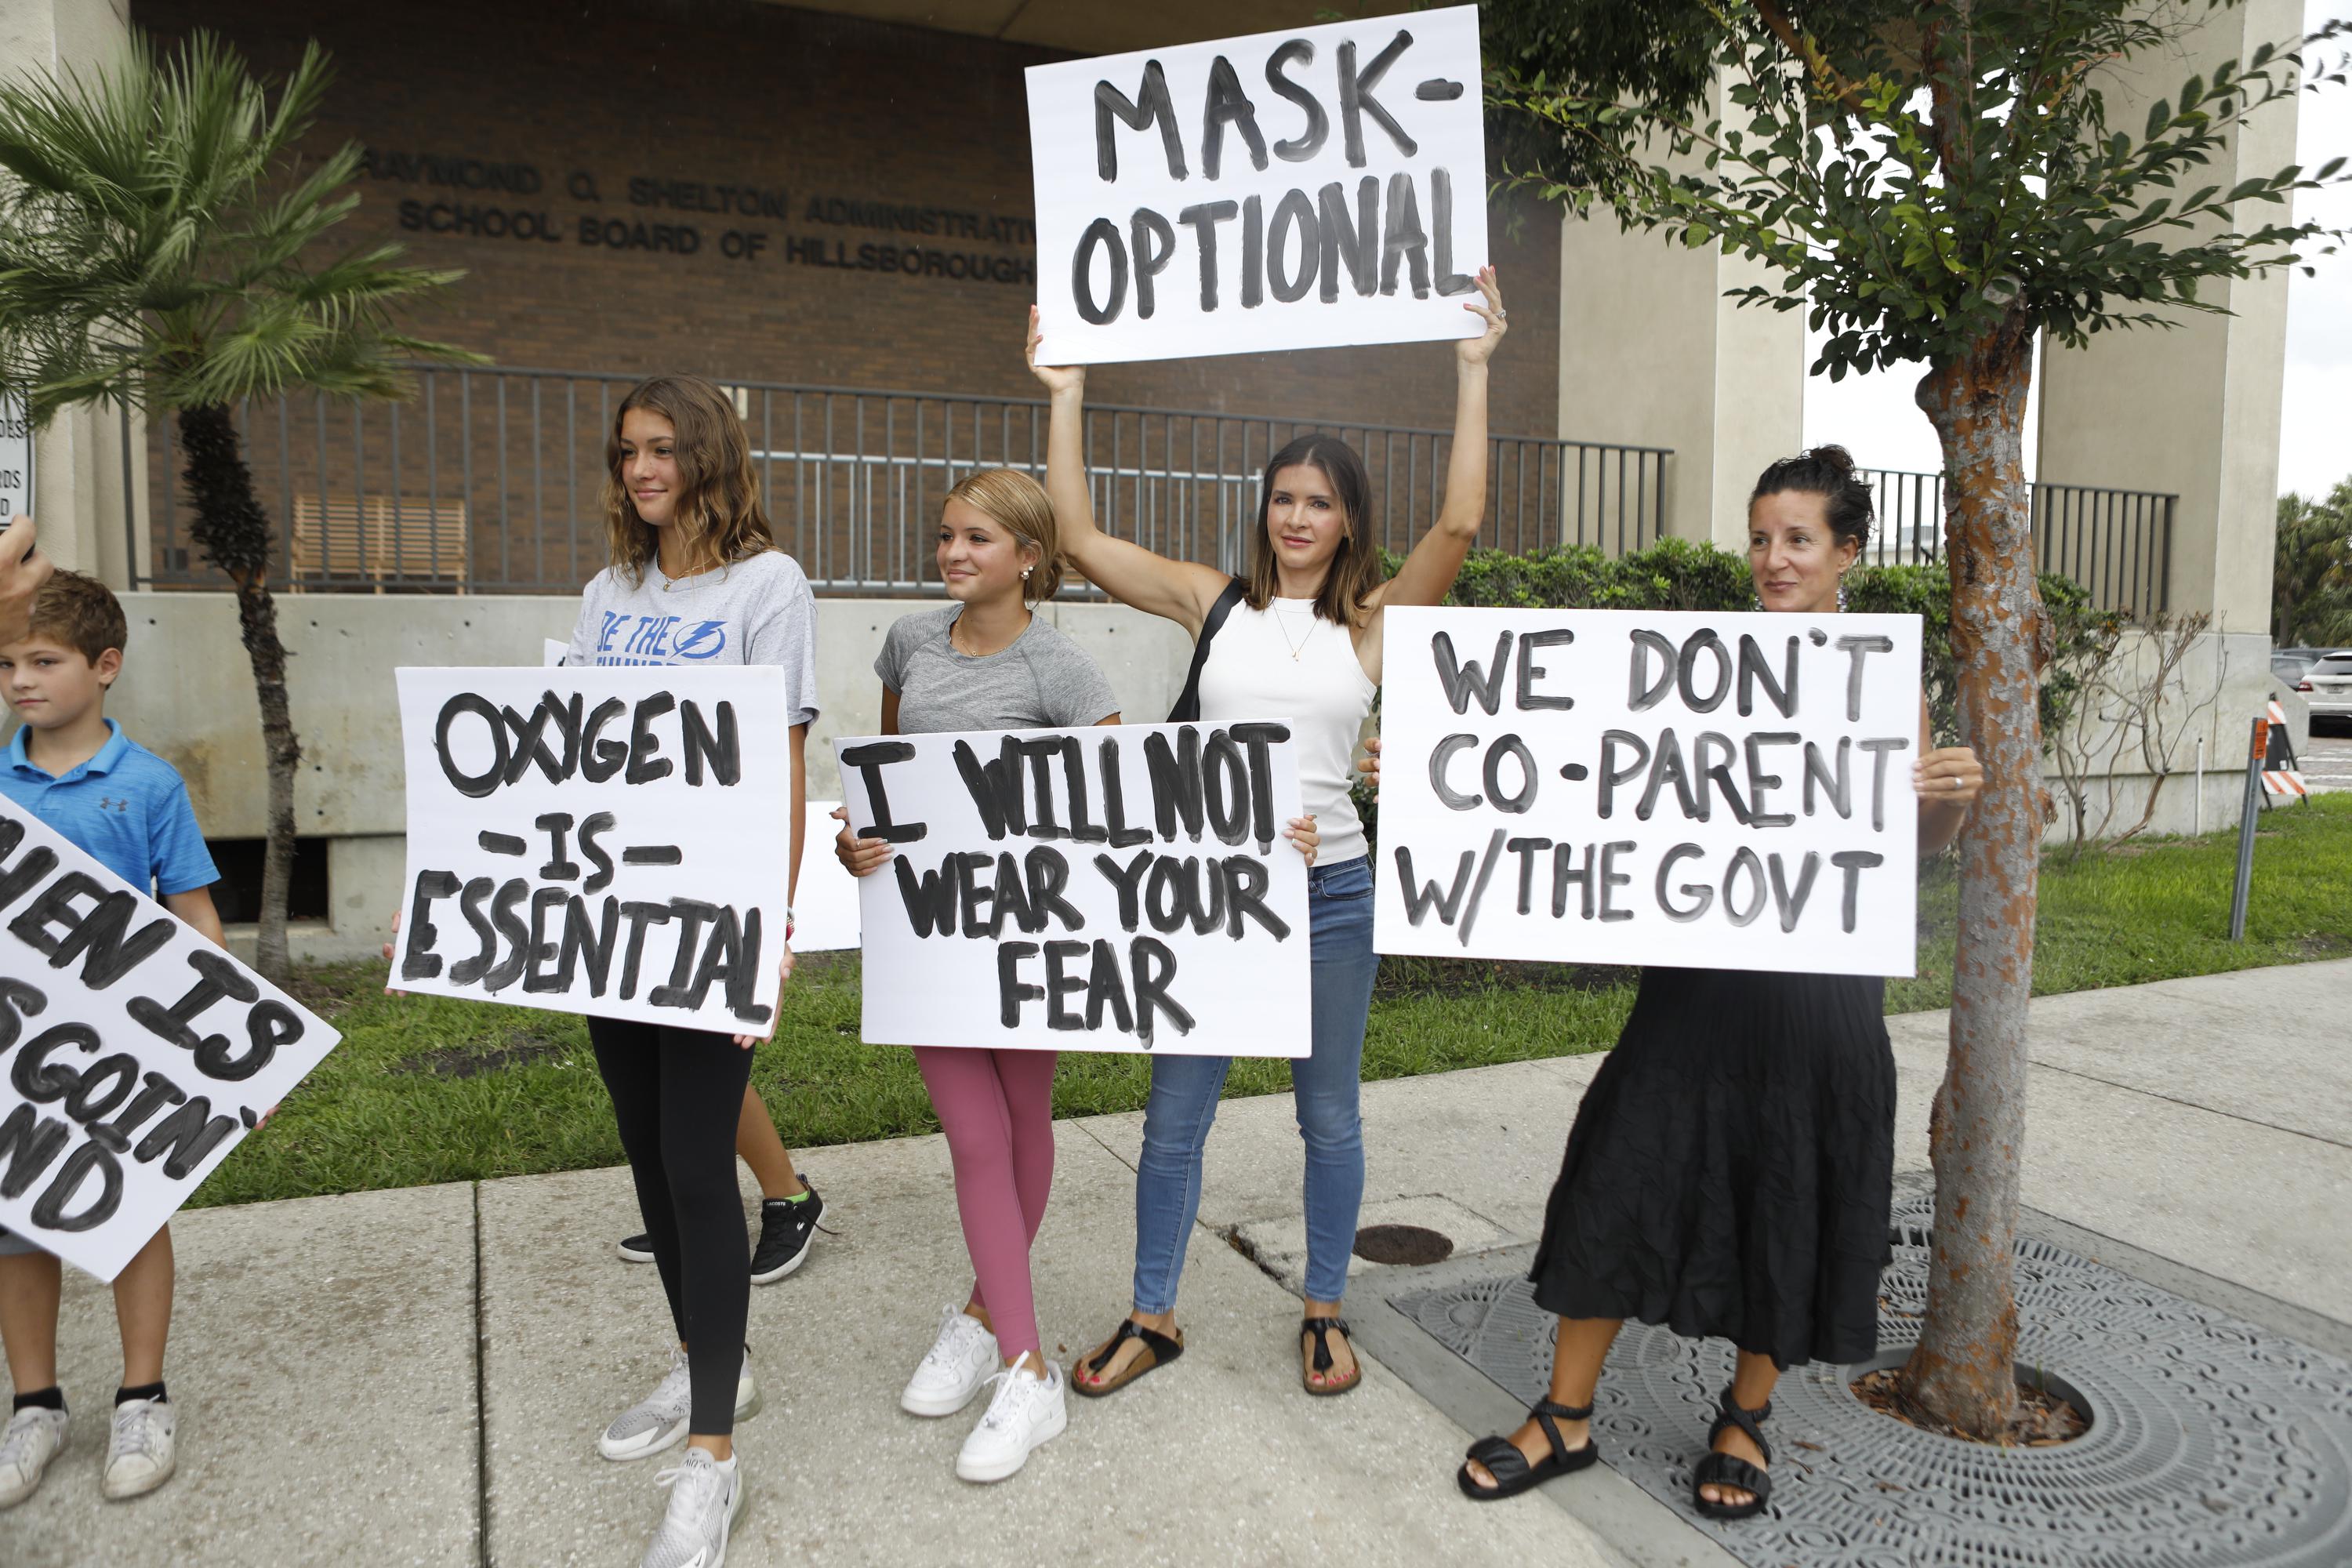 Families hold sign saying things like, "Oxygen is essential" and "I will not wear your fear."